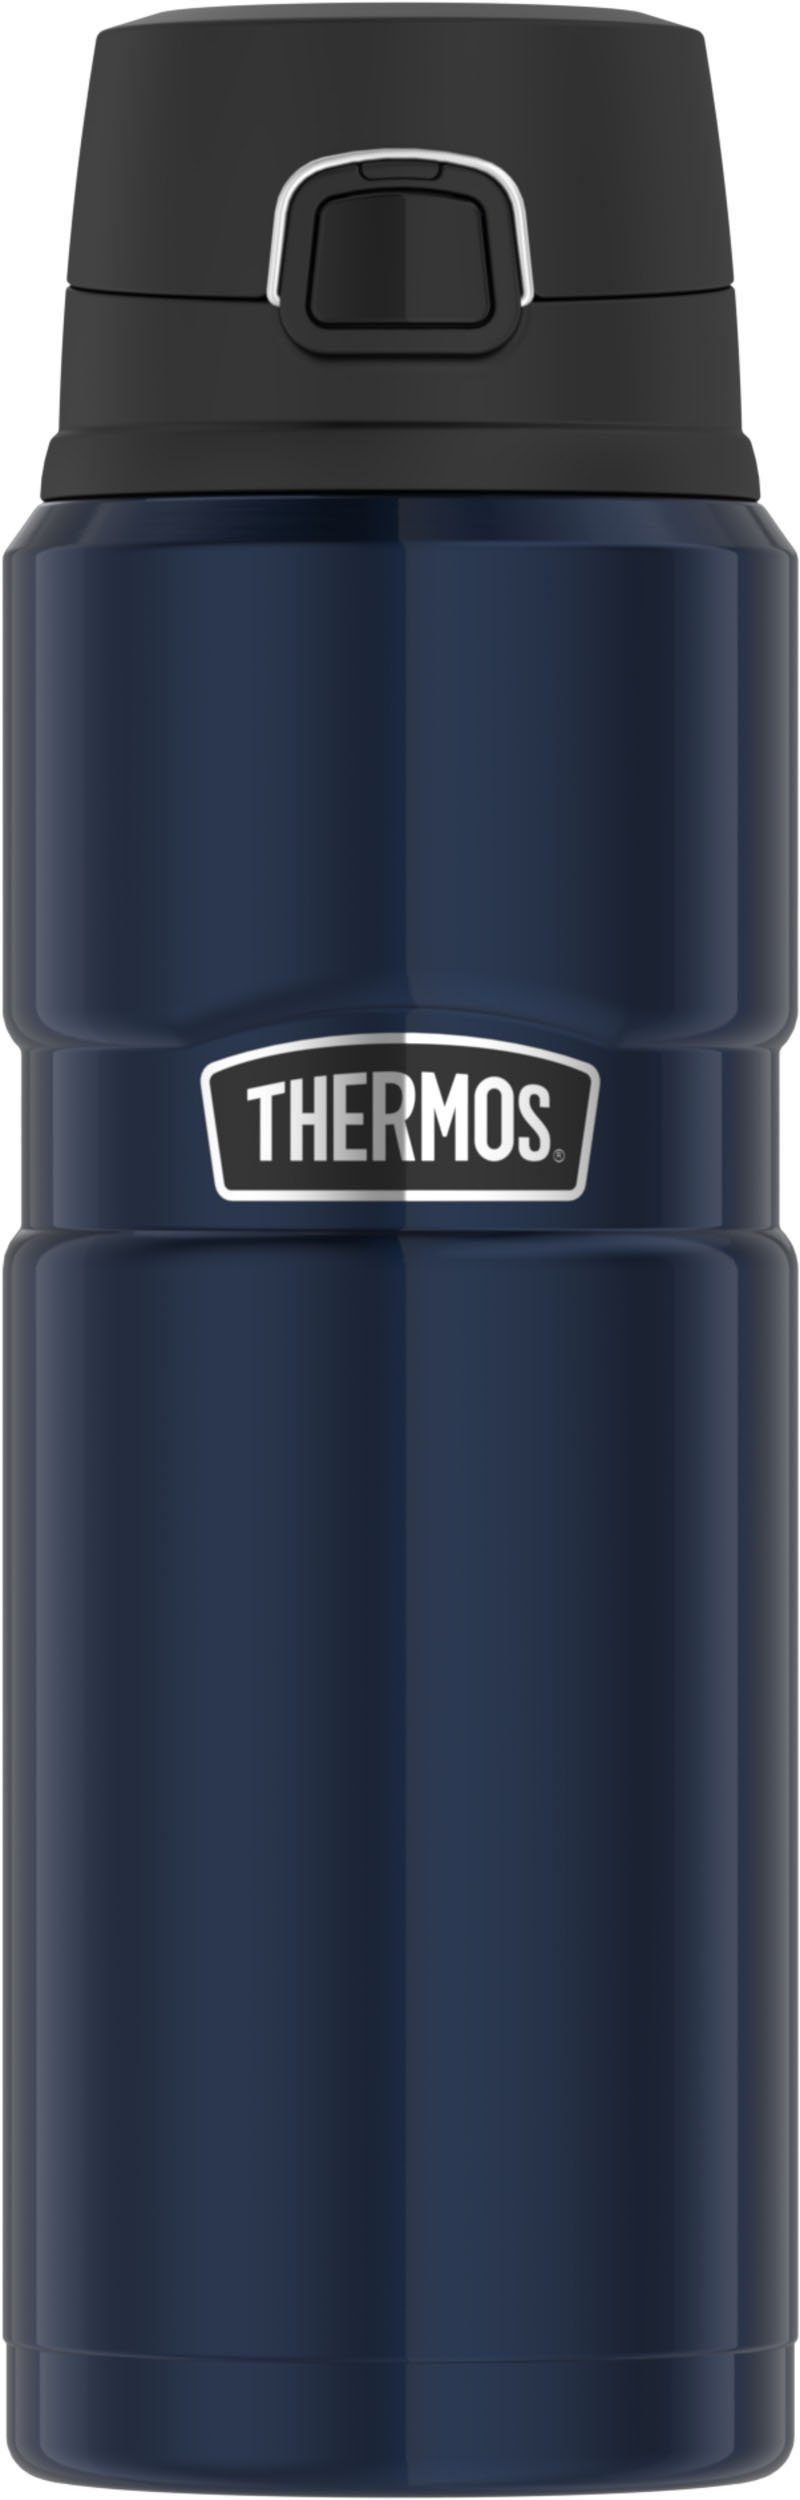 King, THERMOS blau 0,7 Stainless Liter Thermoflasche Edelstahl,